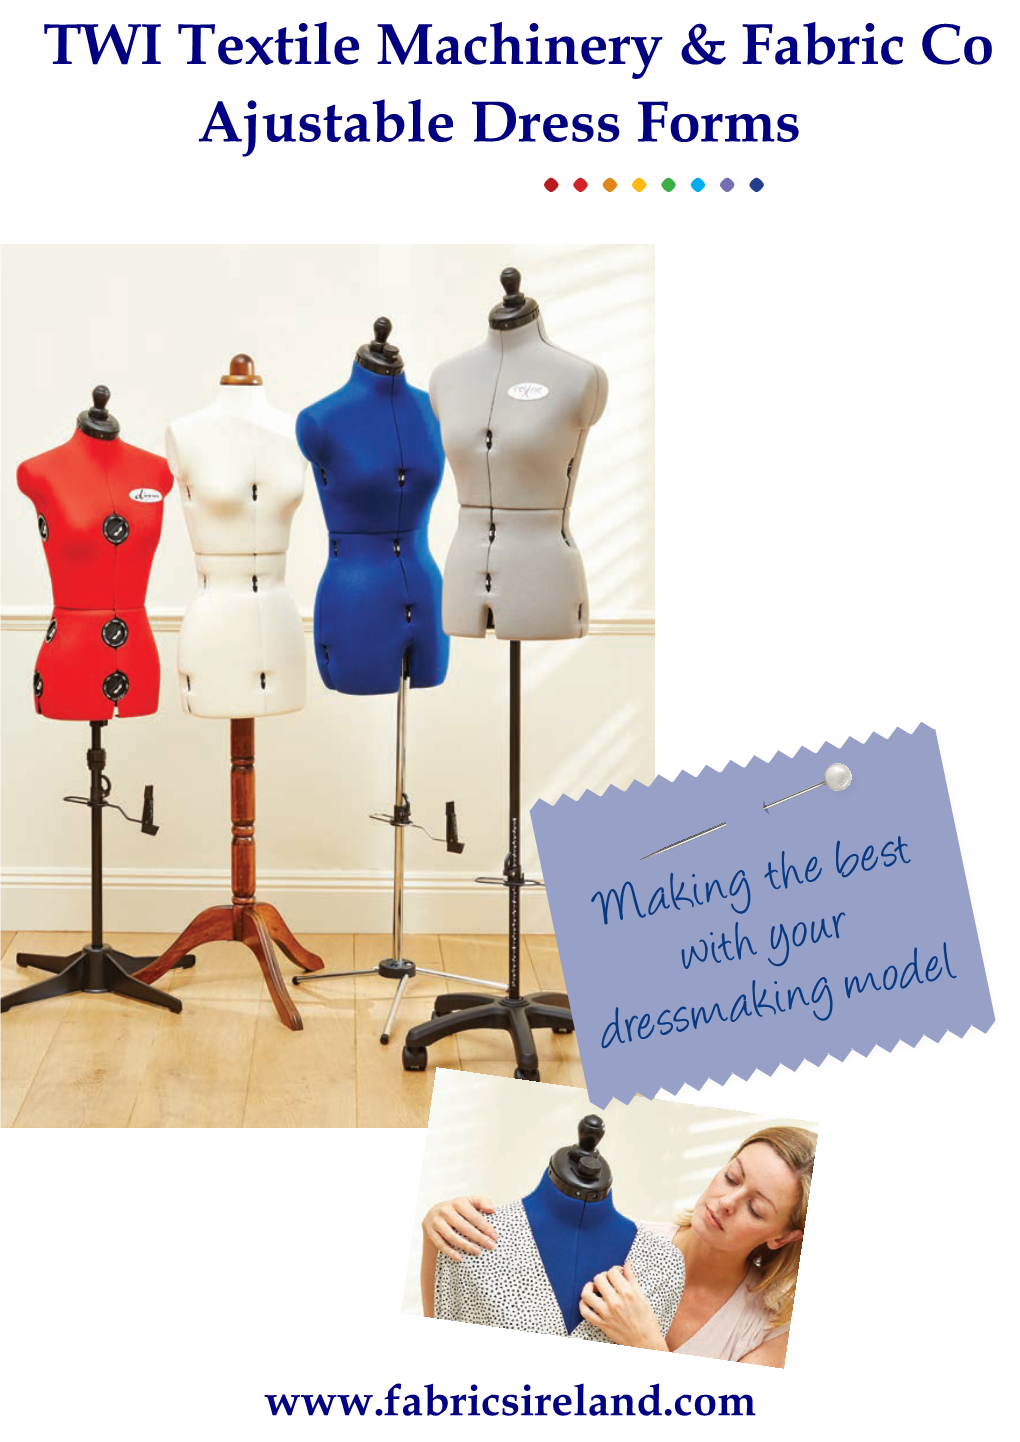 Making the Best with Your Dressmaking Model